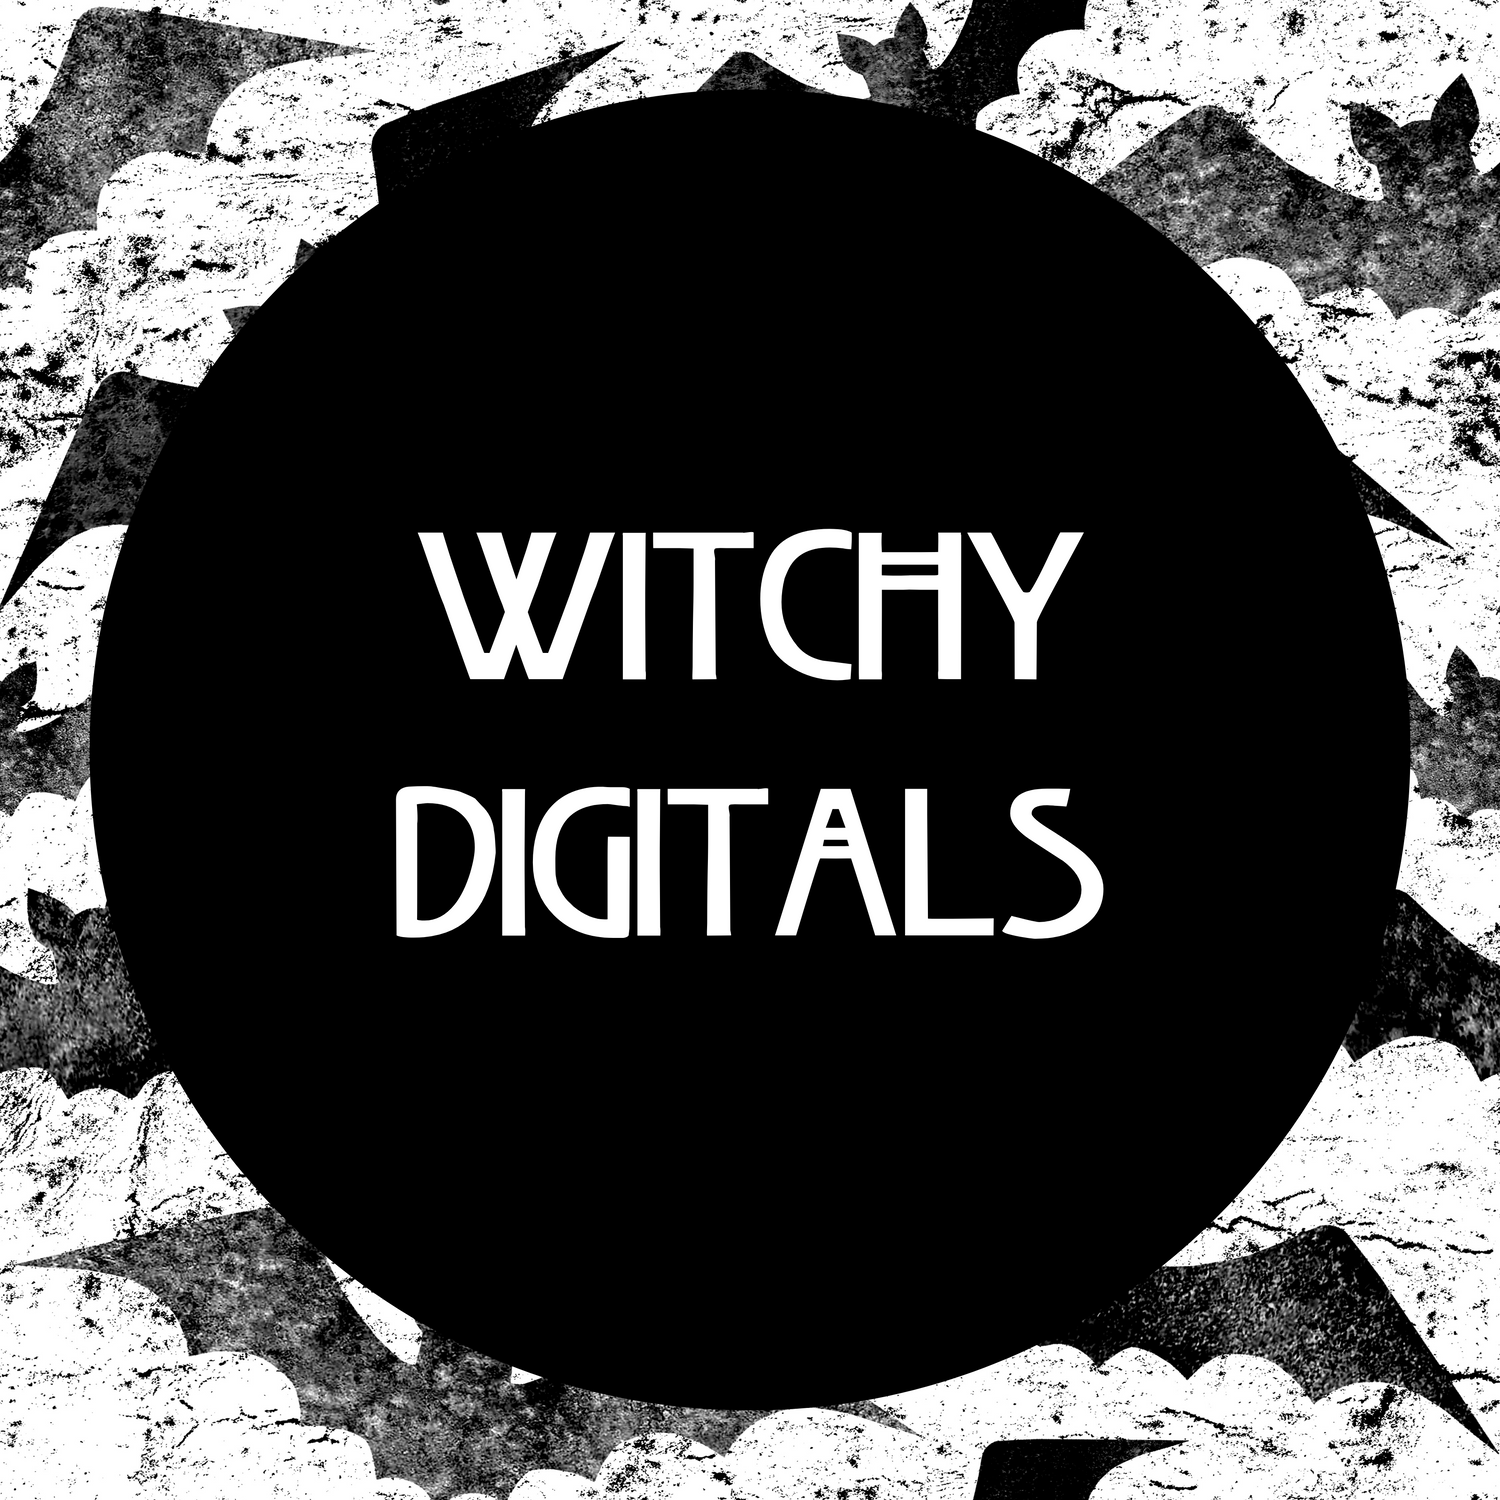 Witchy Digitals